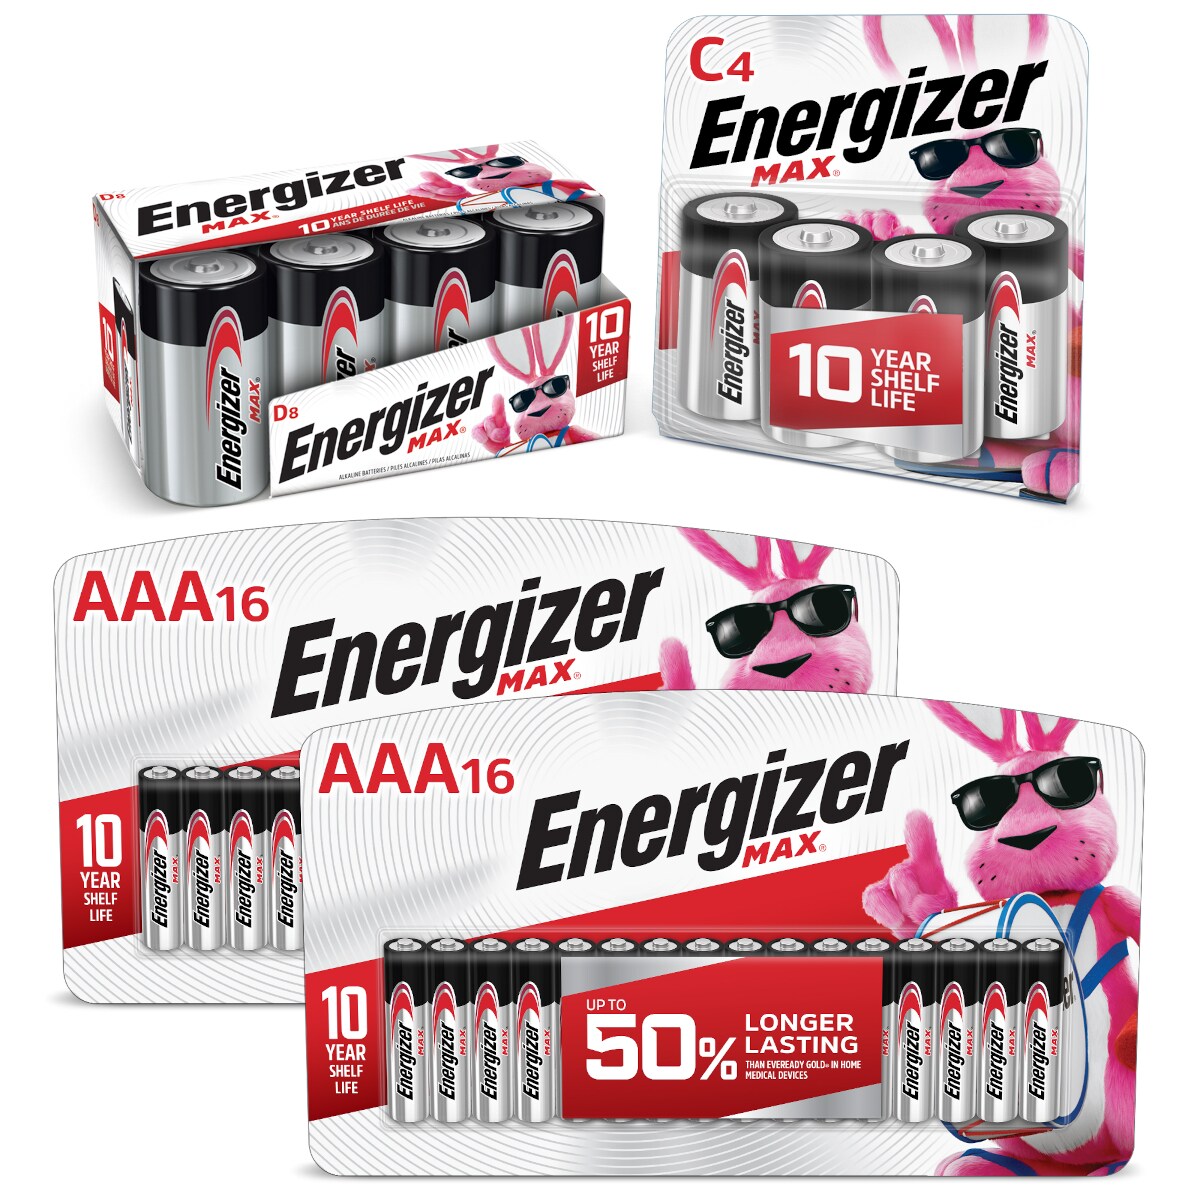 ENERGIZER Pile Power Family pack de 16 piles AAA ≡ CALIPAGE